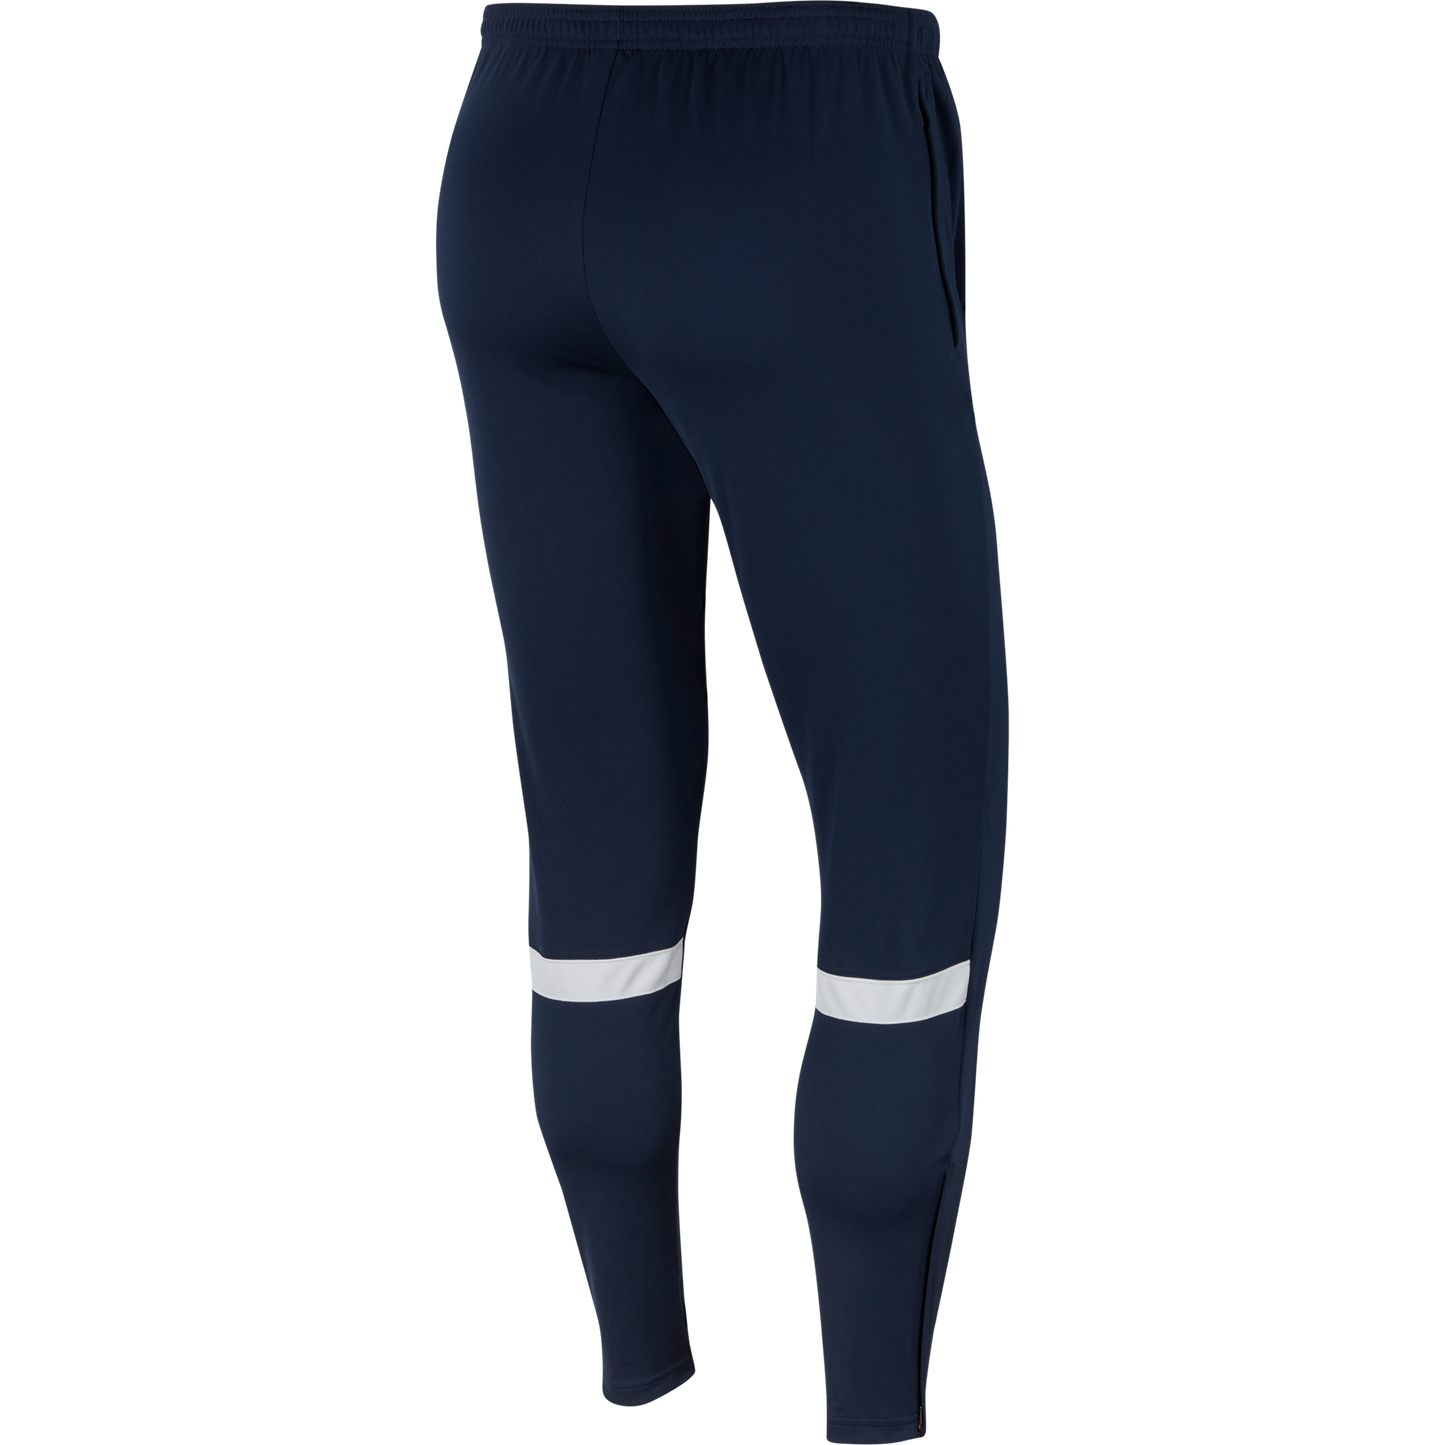 NORTHERN UNITED SPORTS CLUB ACADEMY 21 PANT - MEN'S